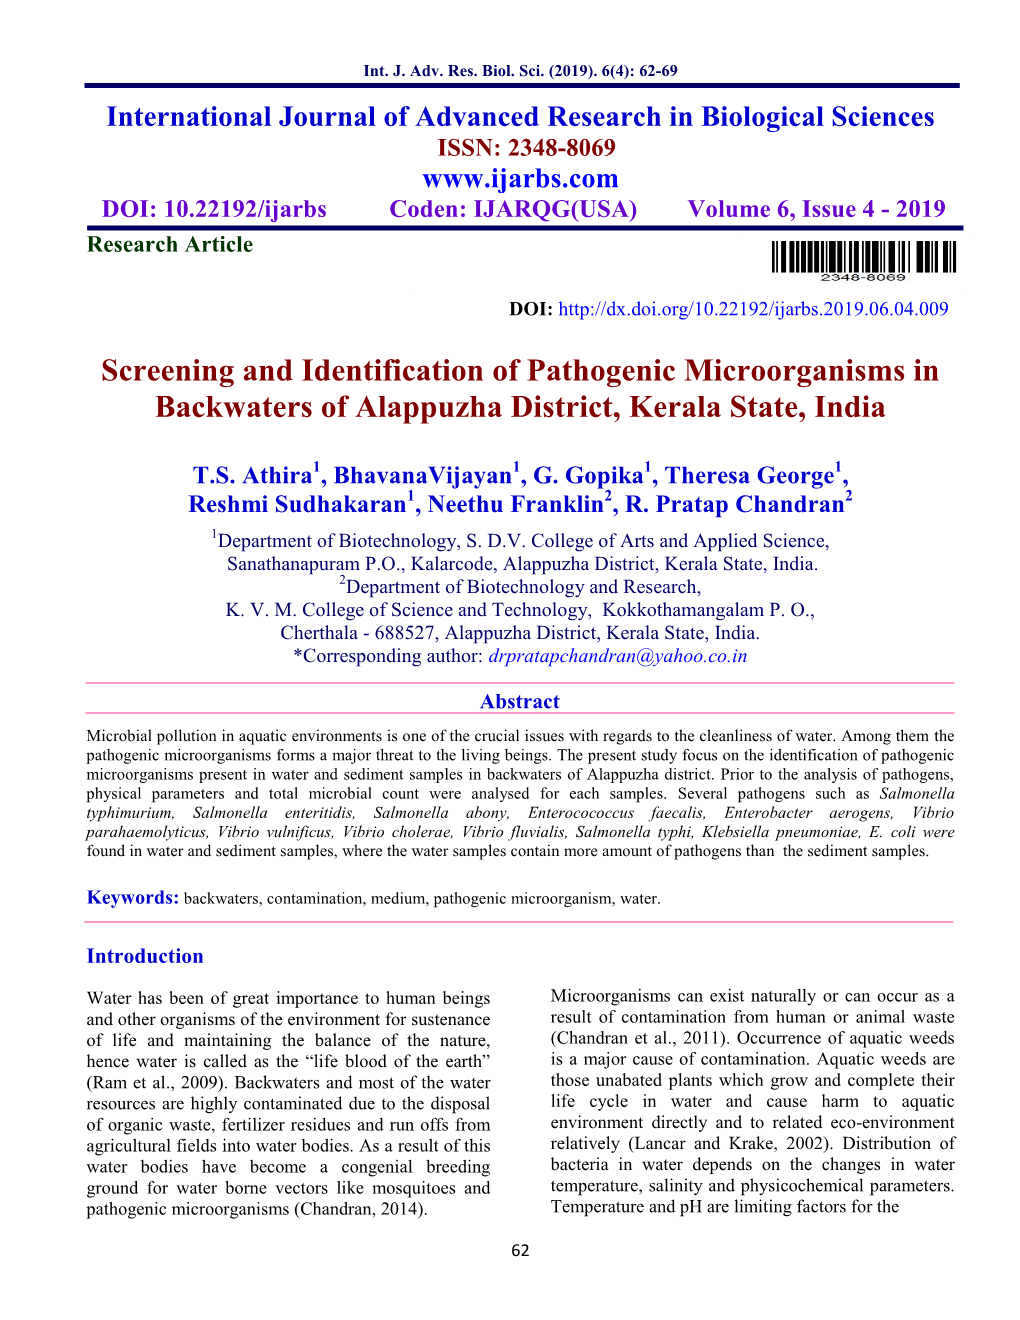 Screening and Identification of Pathogenic Microorganisms in Backwaters of Alappuzha District, Kerala State, India